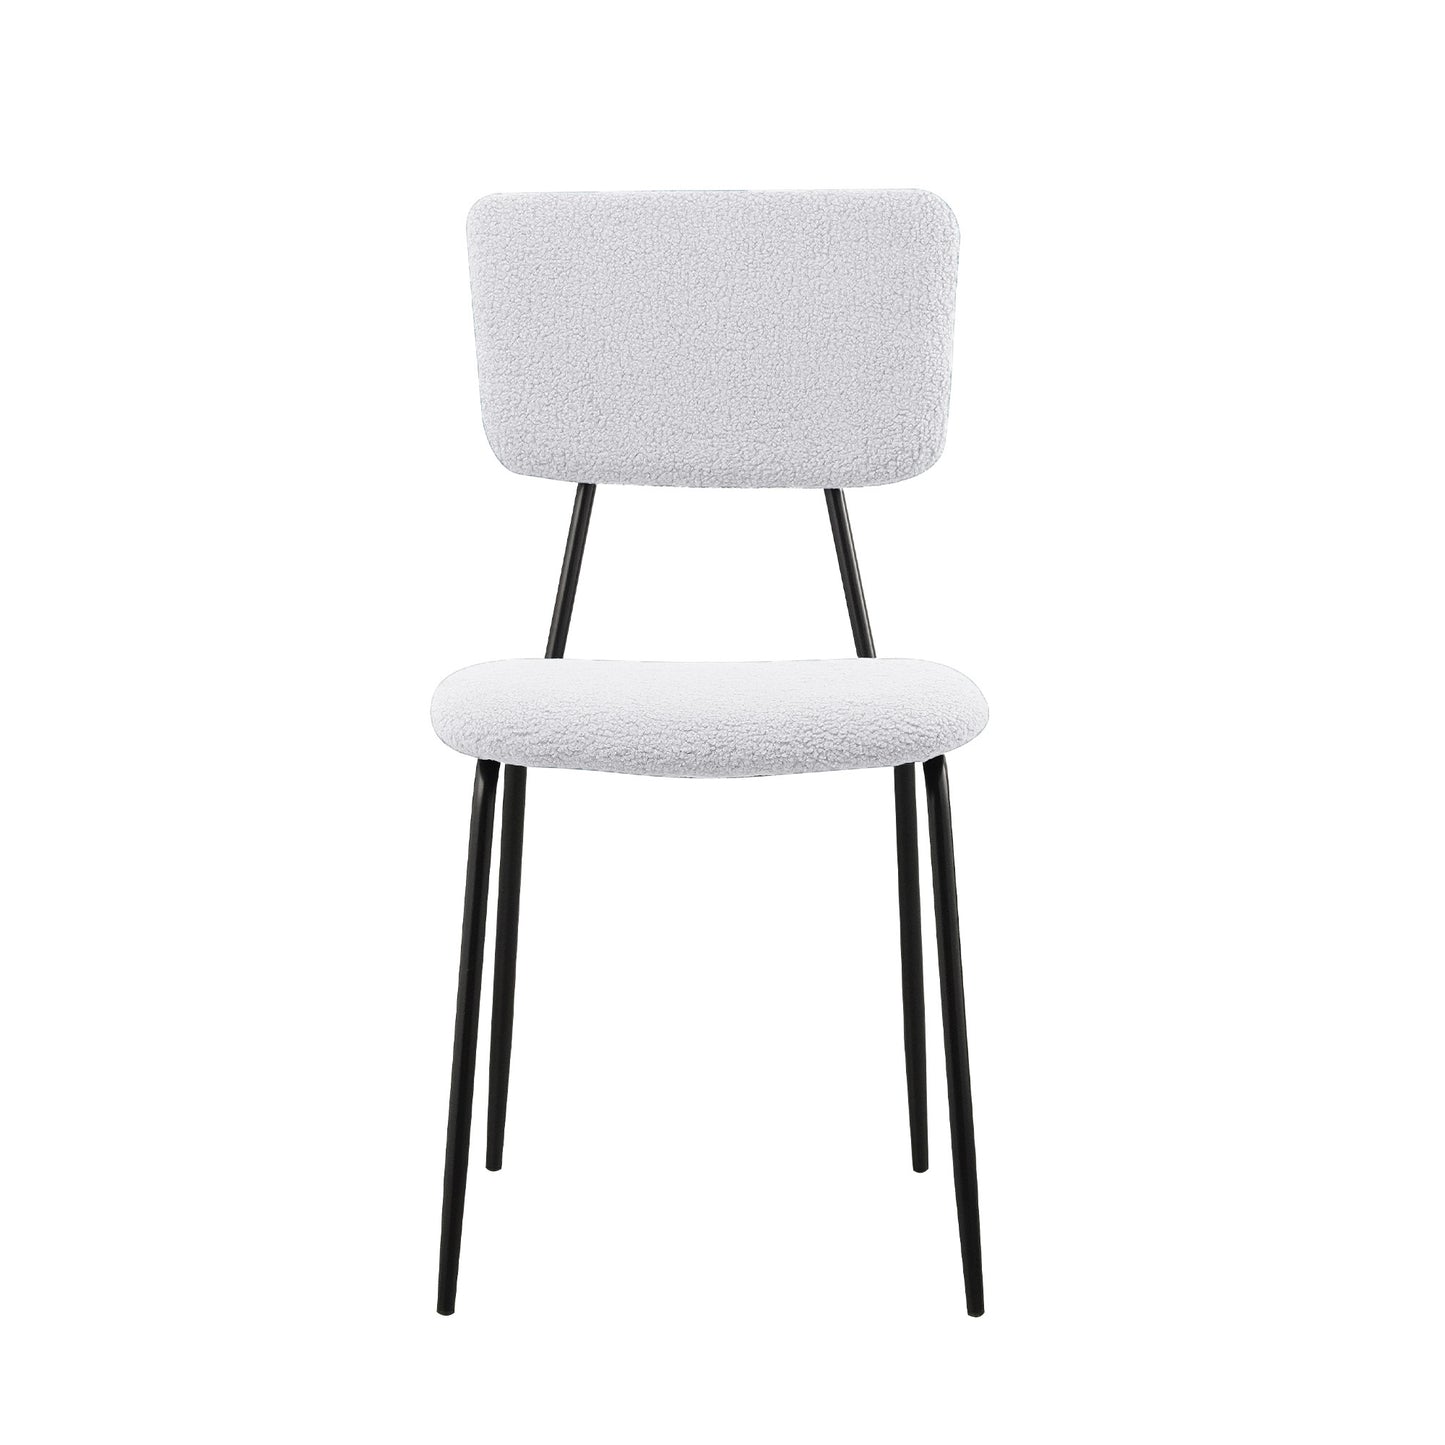 Dining Room Chairs Set of 2, Modern Comfortable Feature Chairs with Faux Plush Upholstered Back and Chrome Legs, Kitchen Side Chairs for Indoor Use: Home, Apartment (2 White Chairs) - Enova Luxe Home Store